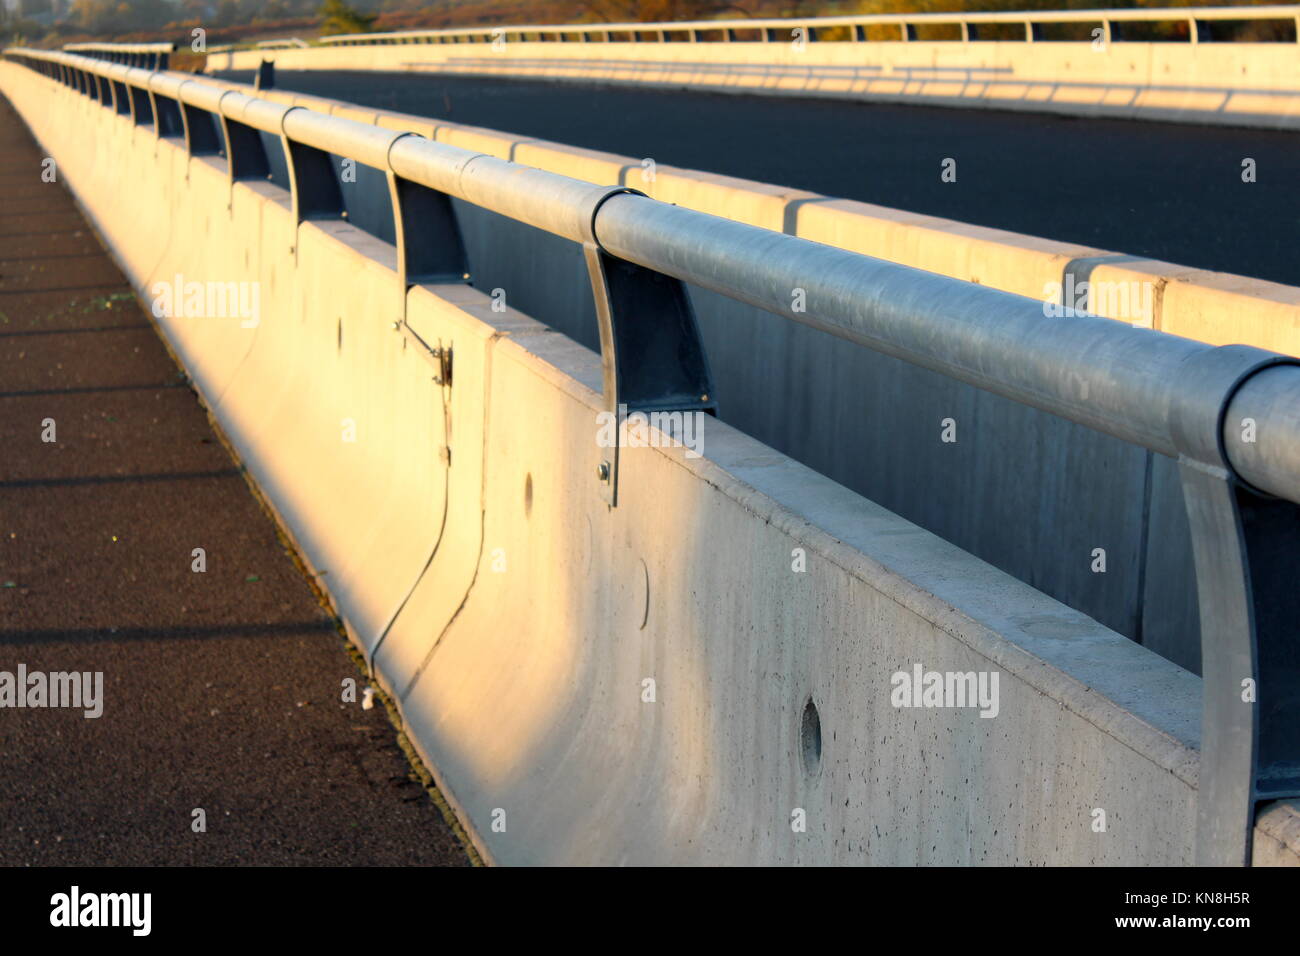 Concrete road bridge barrier with strong metal safety guard rails mounted on top at sunset Stock Photo